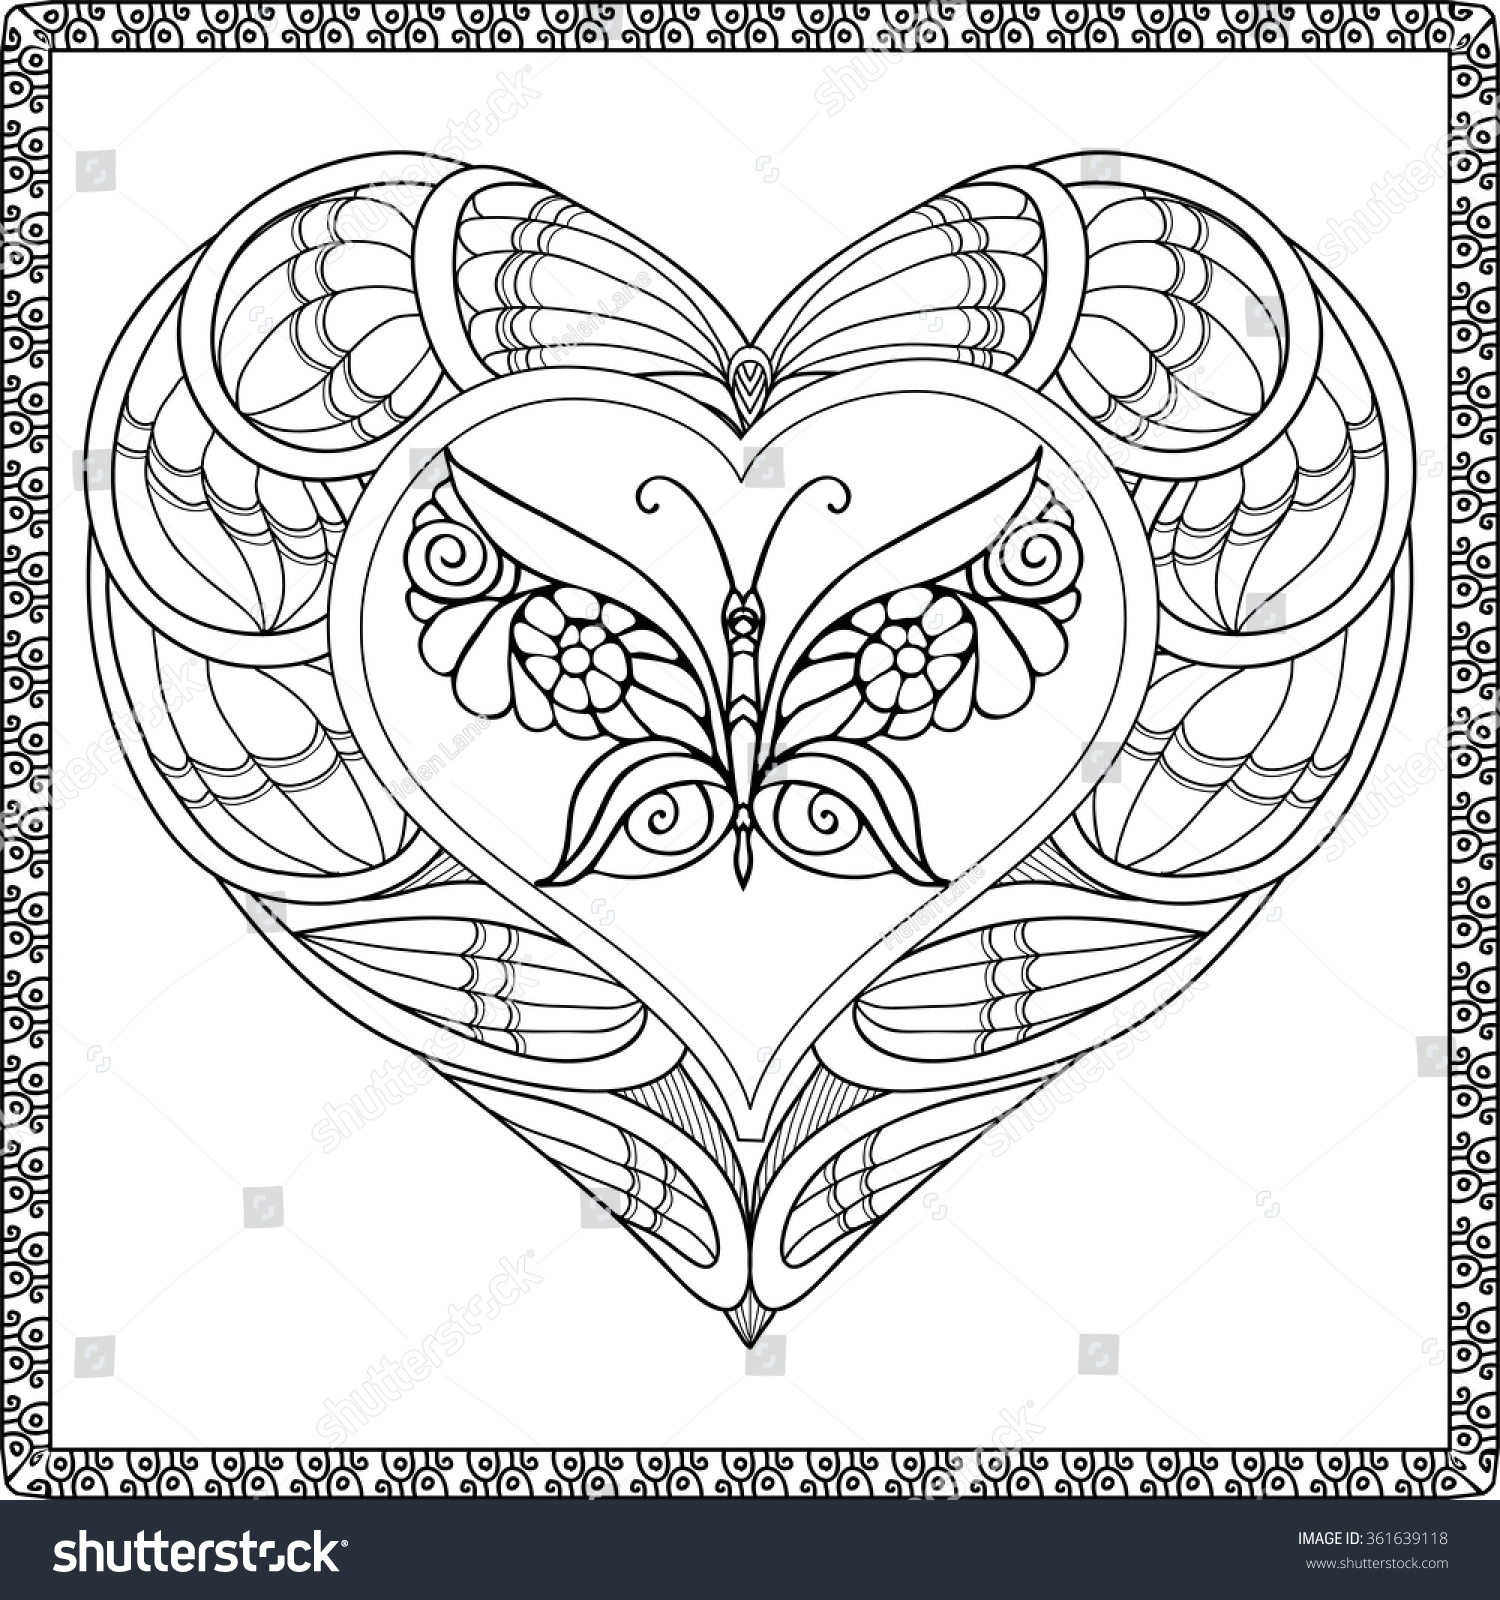 Love Heart Butterfly Coloring Book Adult Stock Vector 361639118